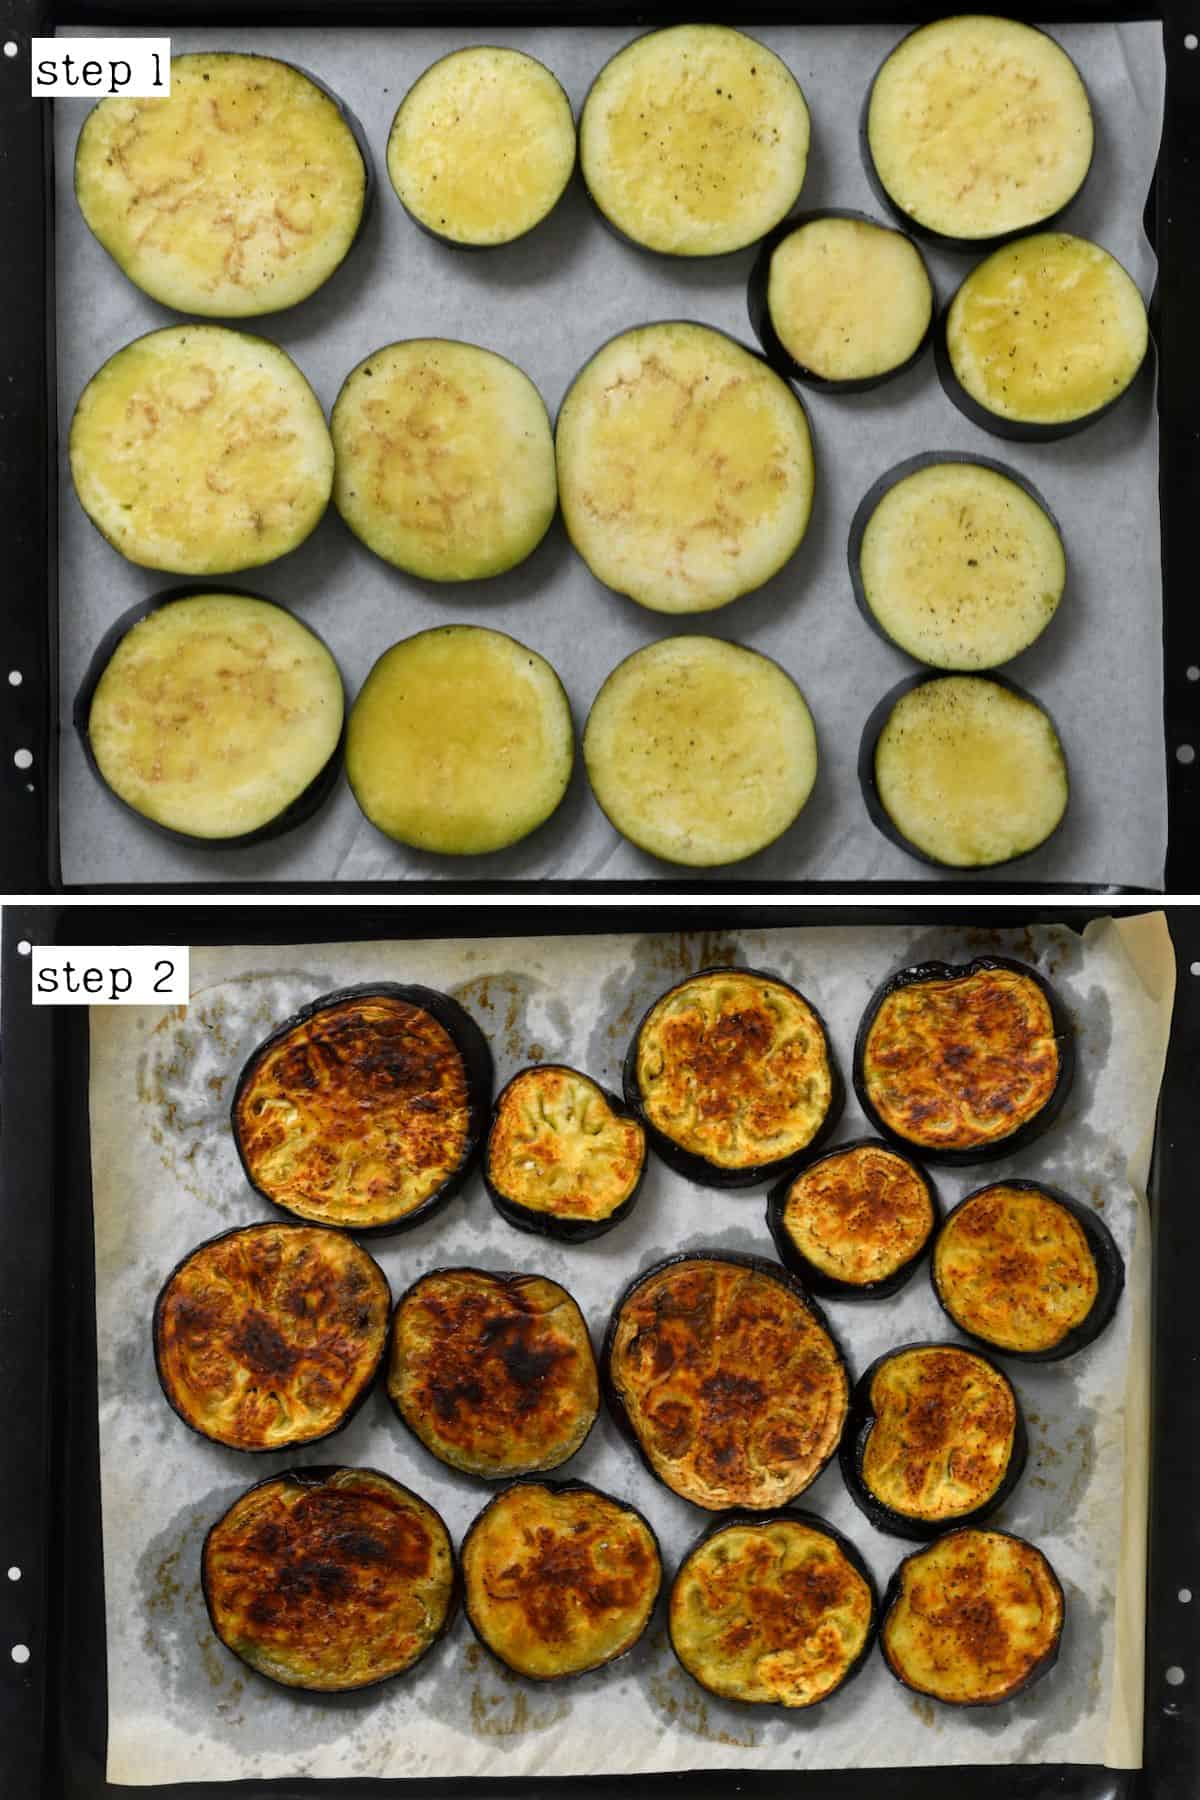 Before and after roasting eggplant slices